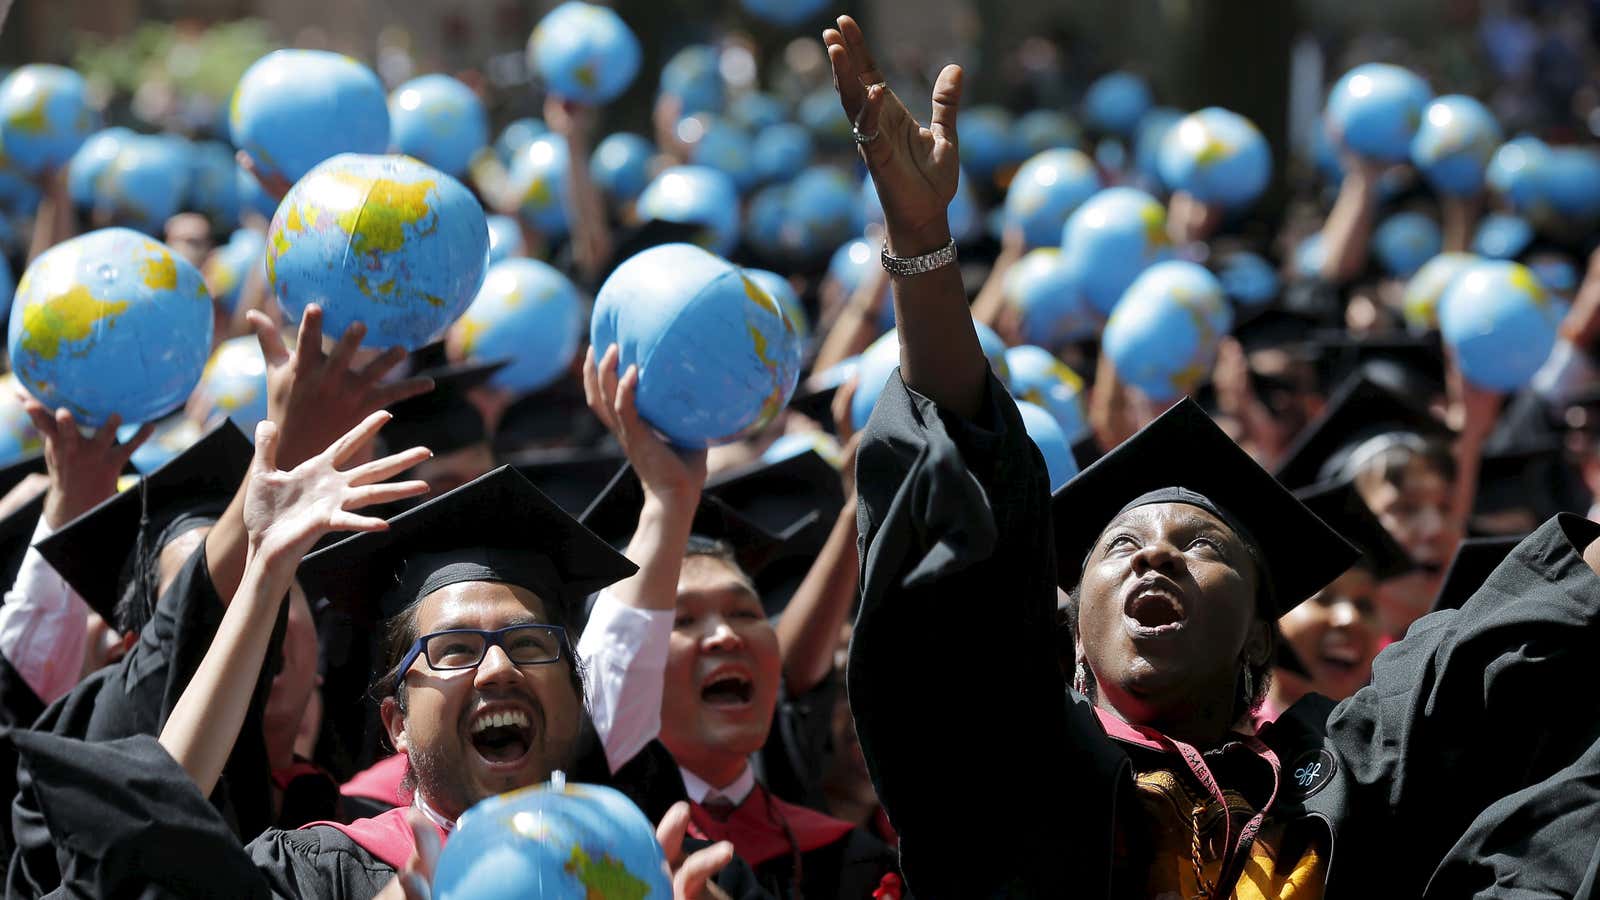 For a new crop of graduates, climate change is a main reason to avoid a job in the fossil fuel industry.